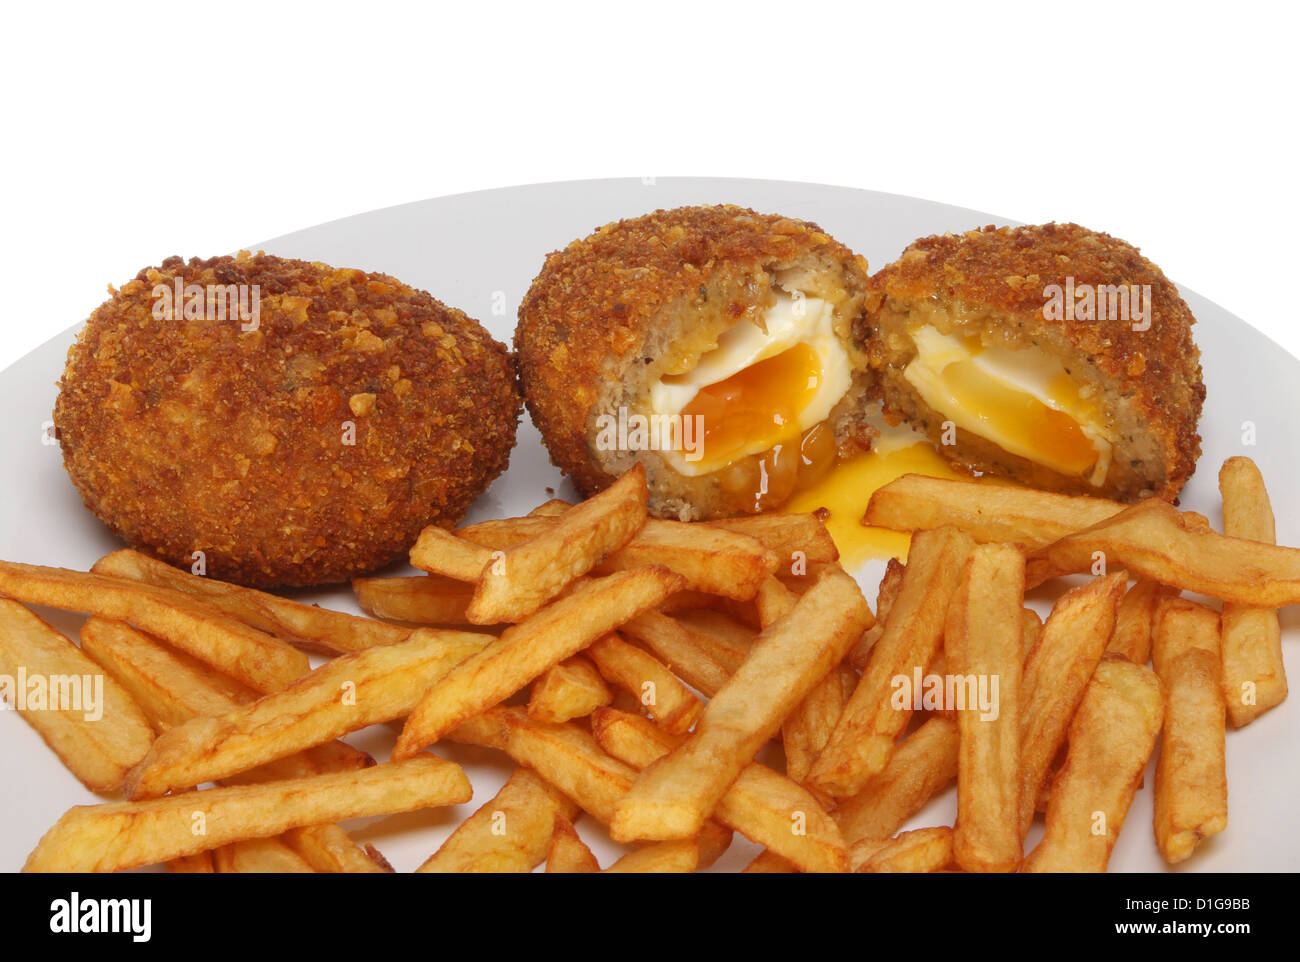 Runny Scotch eggs and chips on a plate Stock Photo